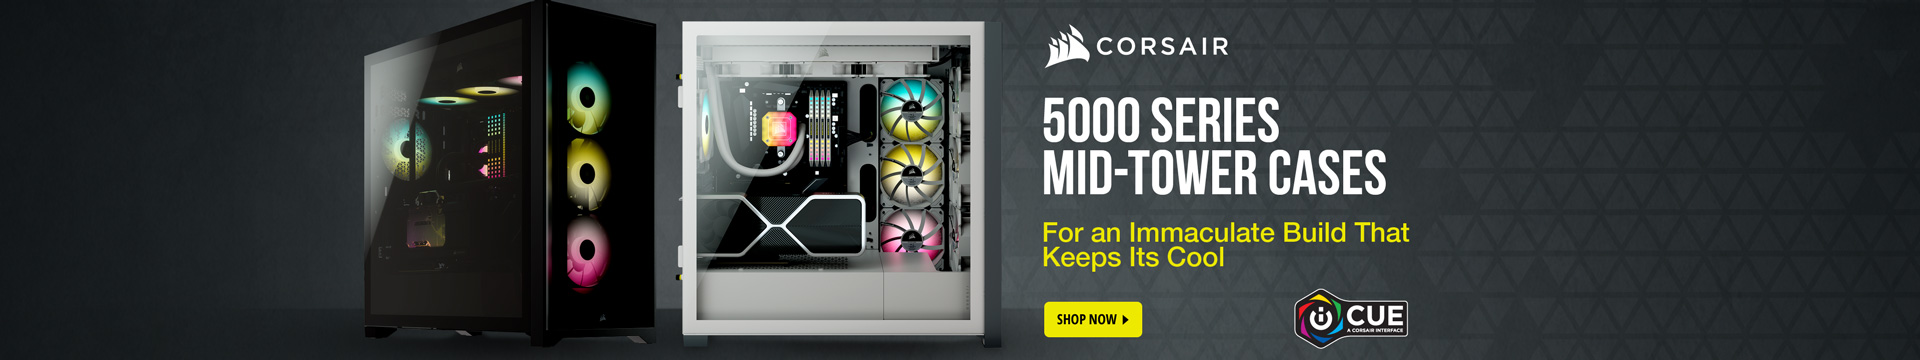 5000 SERIES MID-TOWER CASES |